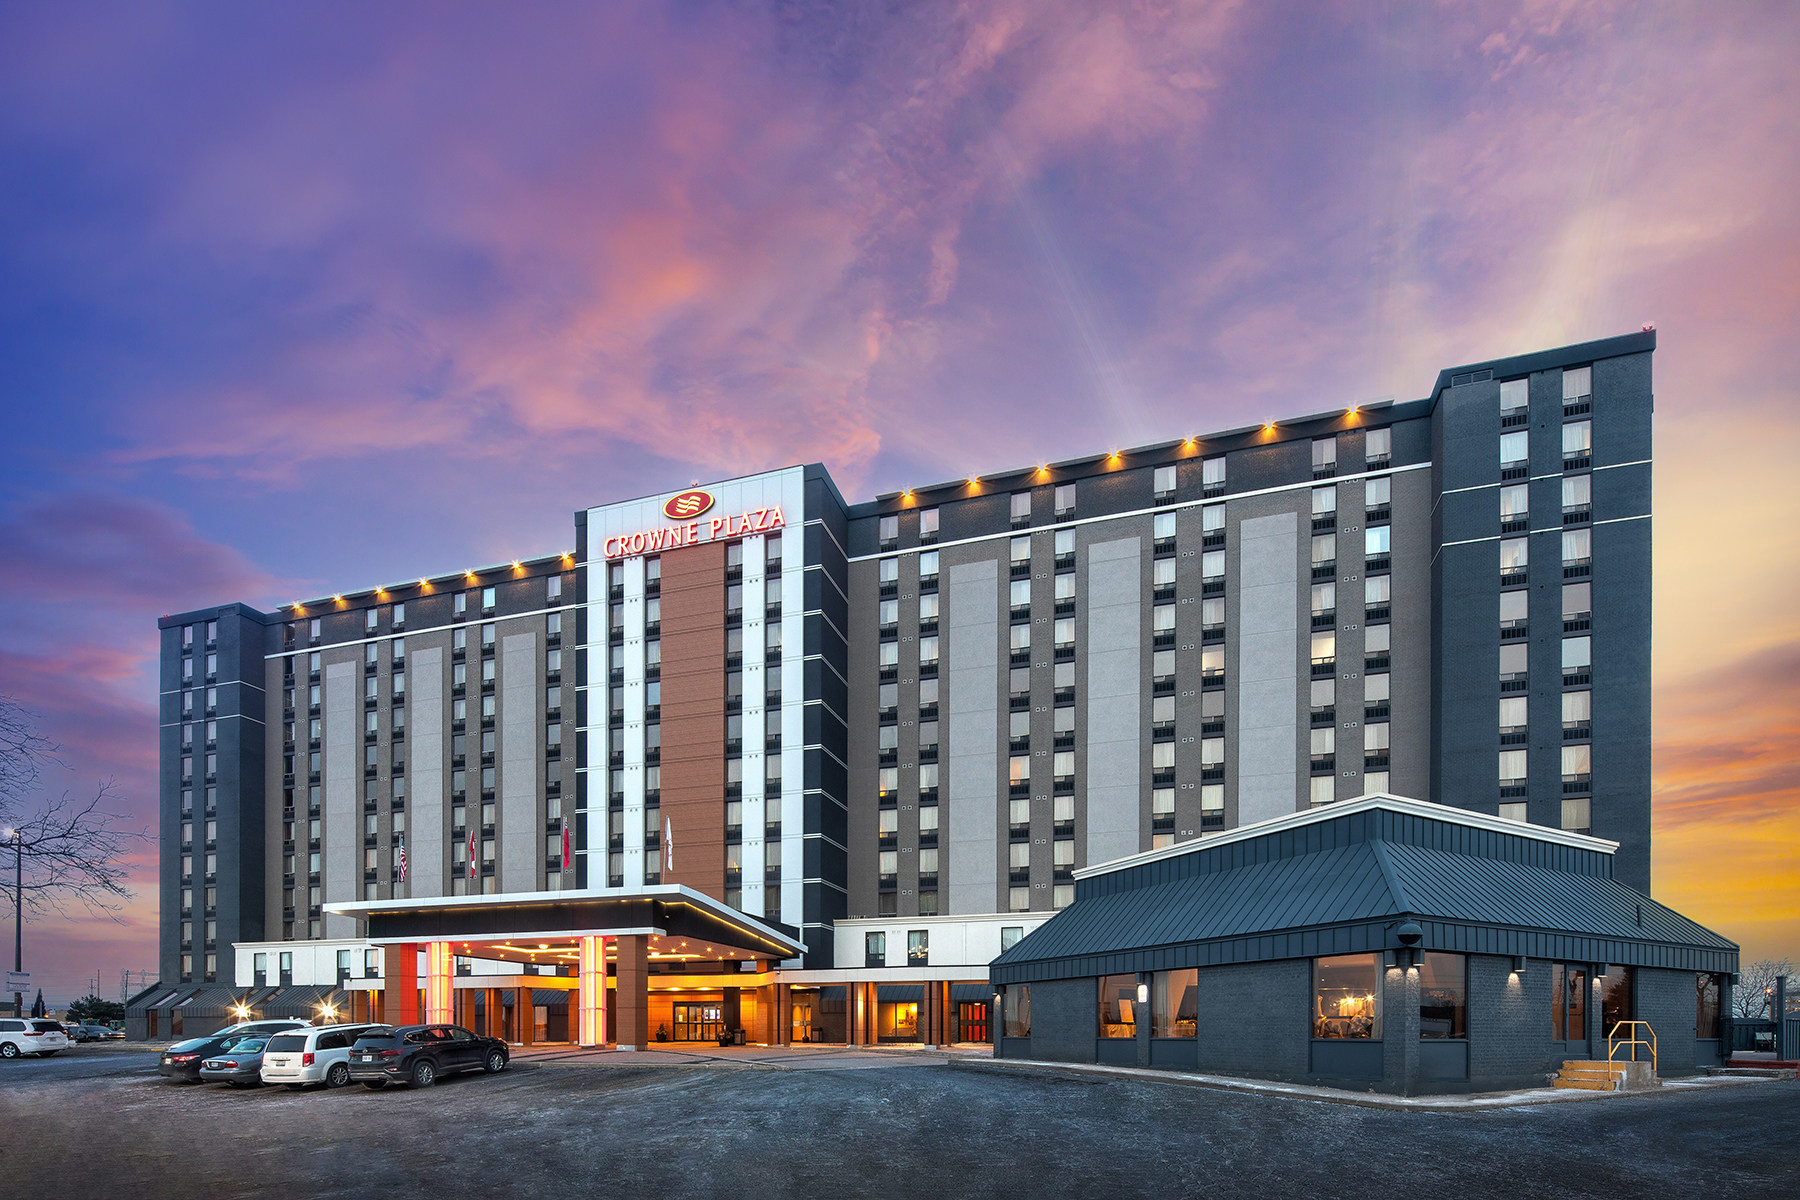 Crowne Plaza Toronto Airport Announces the Completion of a 20M